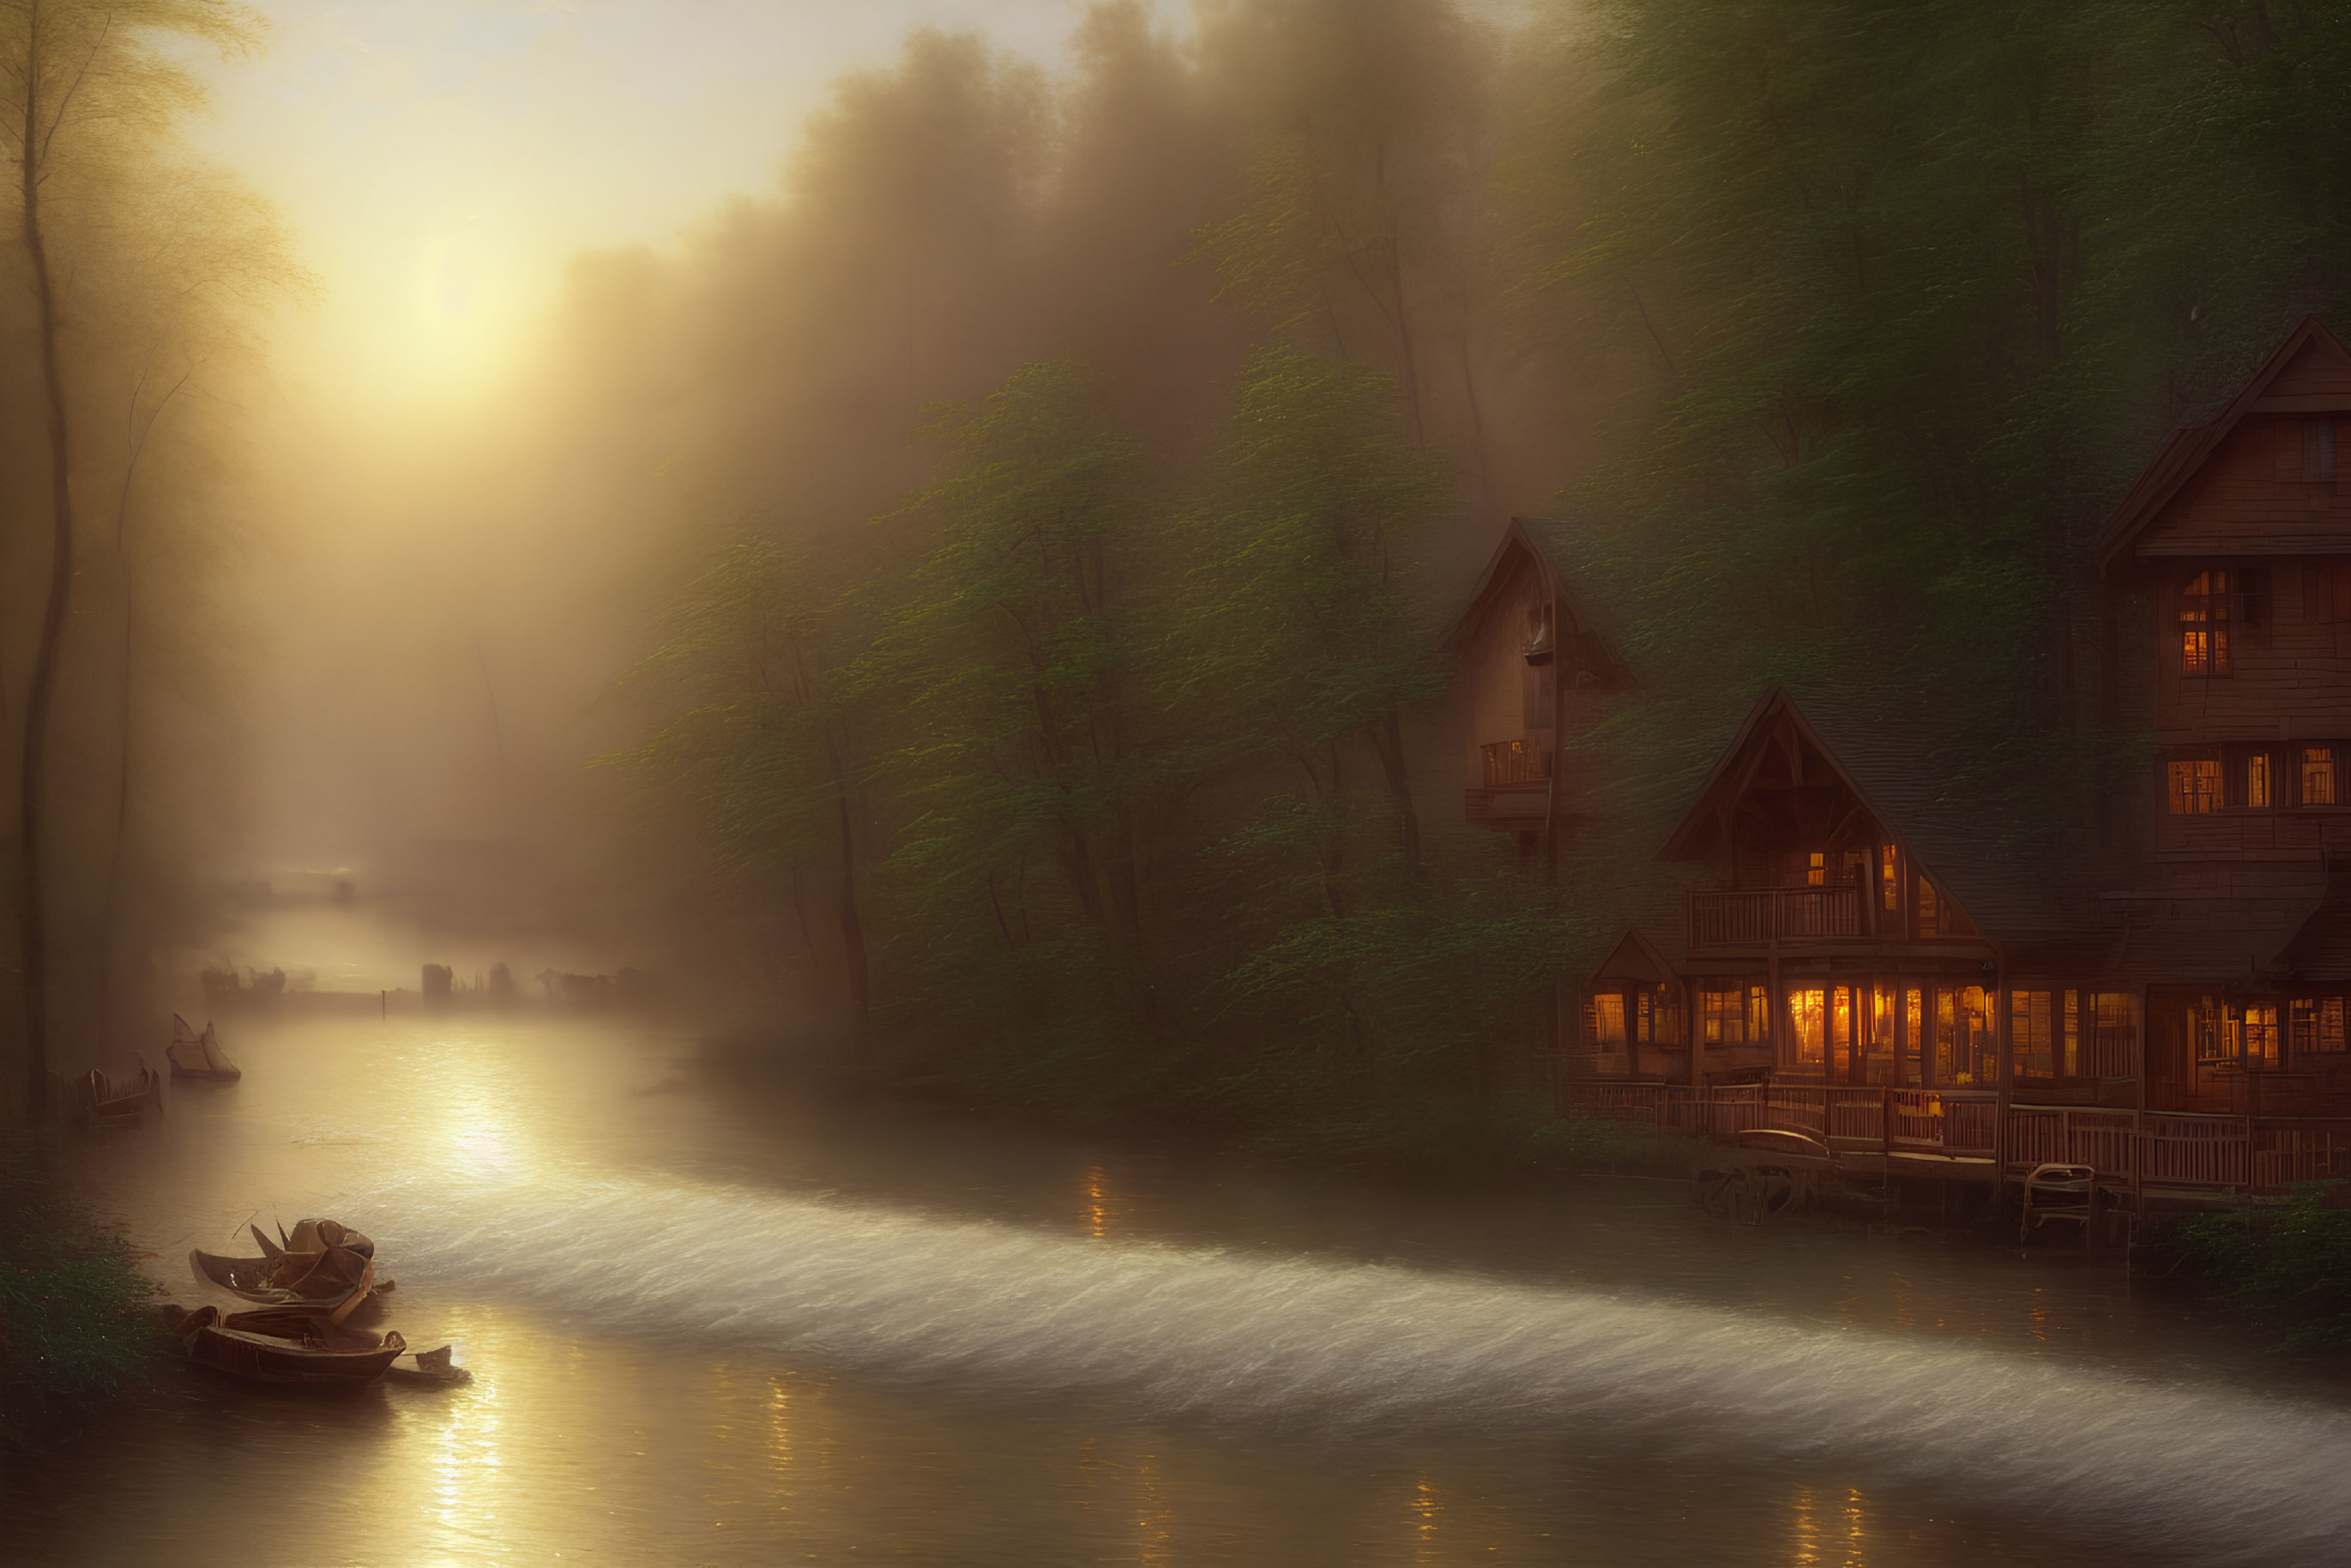 Tranquil river scene at dusk with wooden houses, boat, and misty golden glow